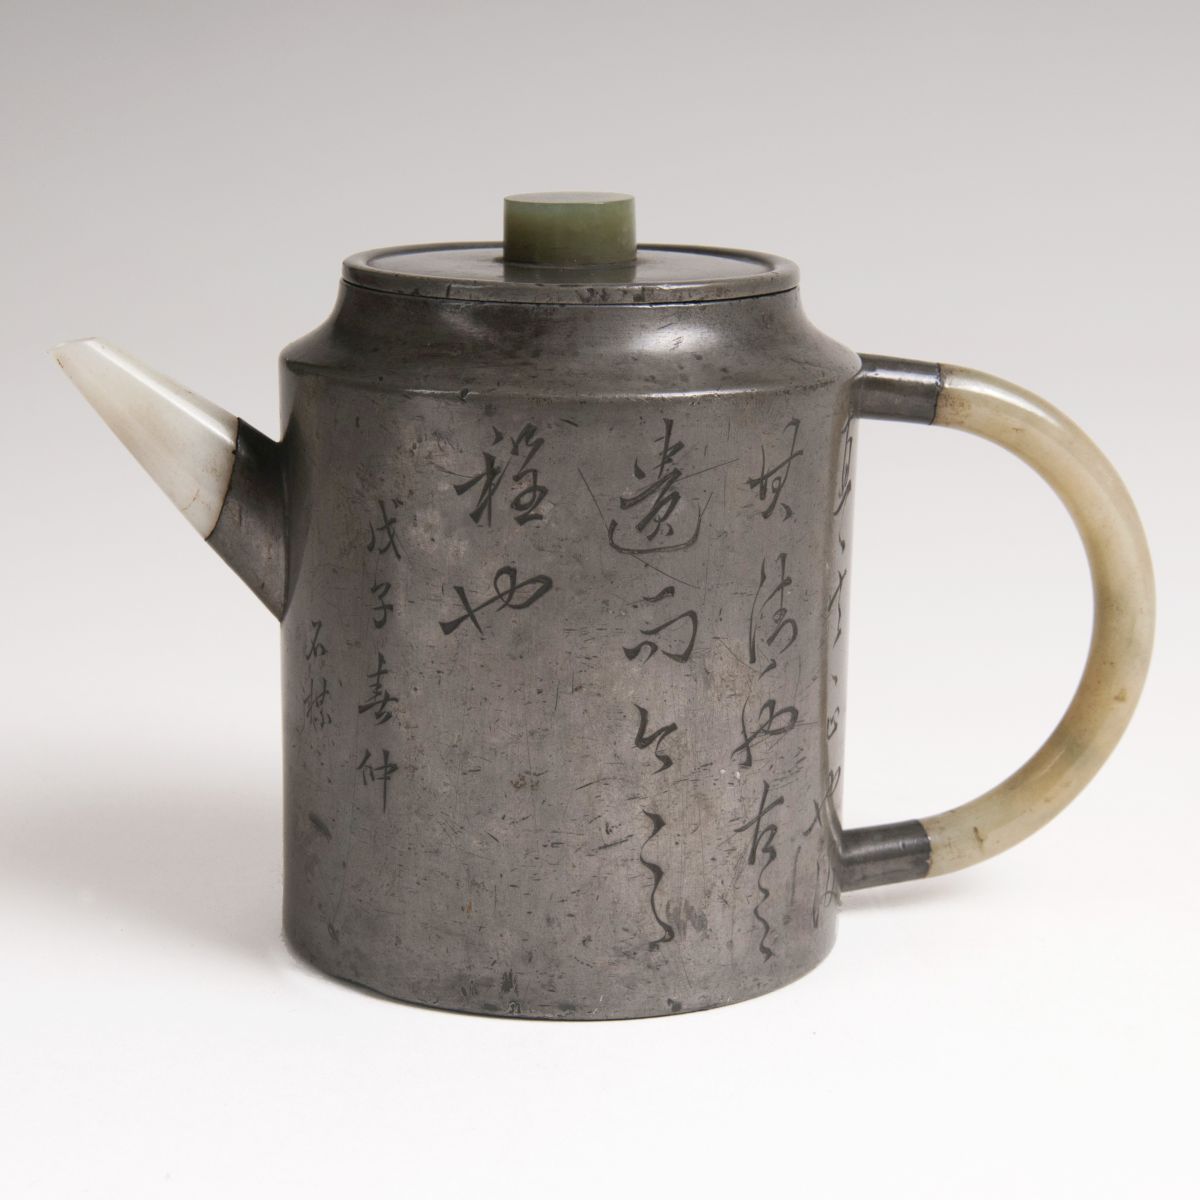 A Chinese pewter pot